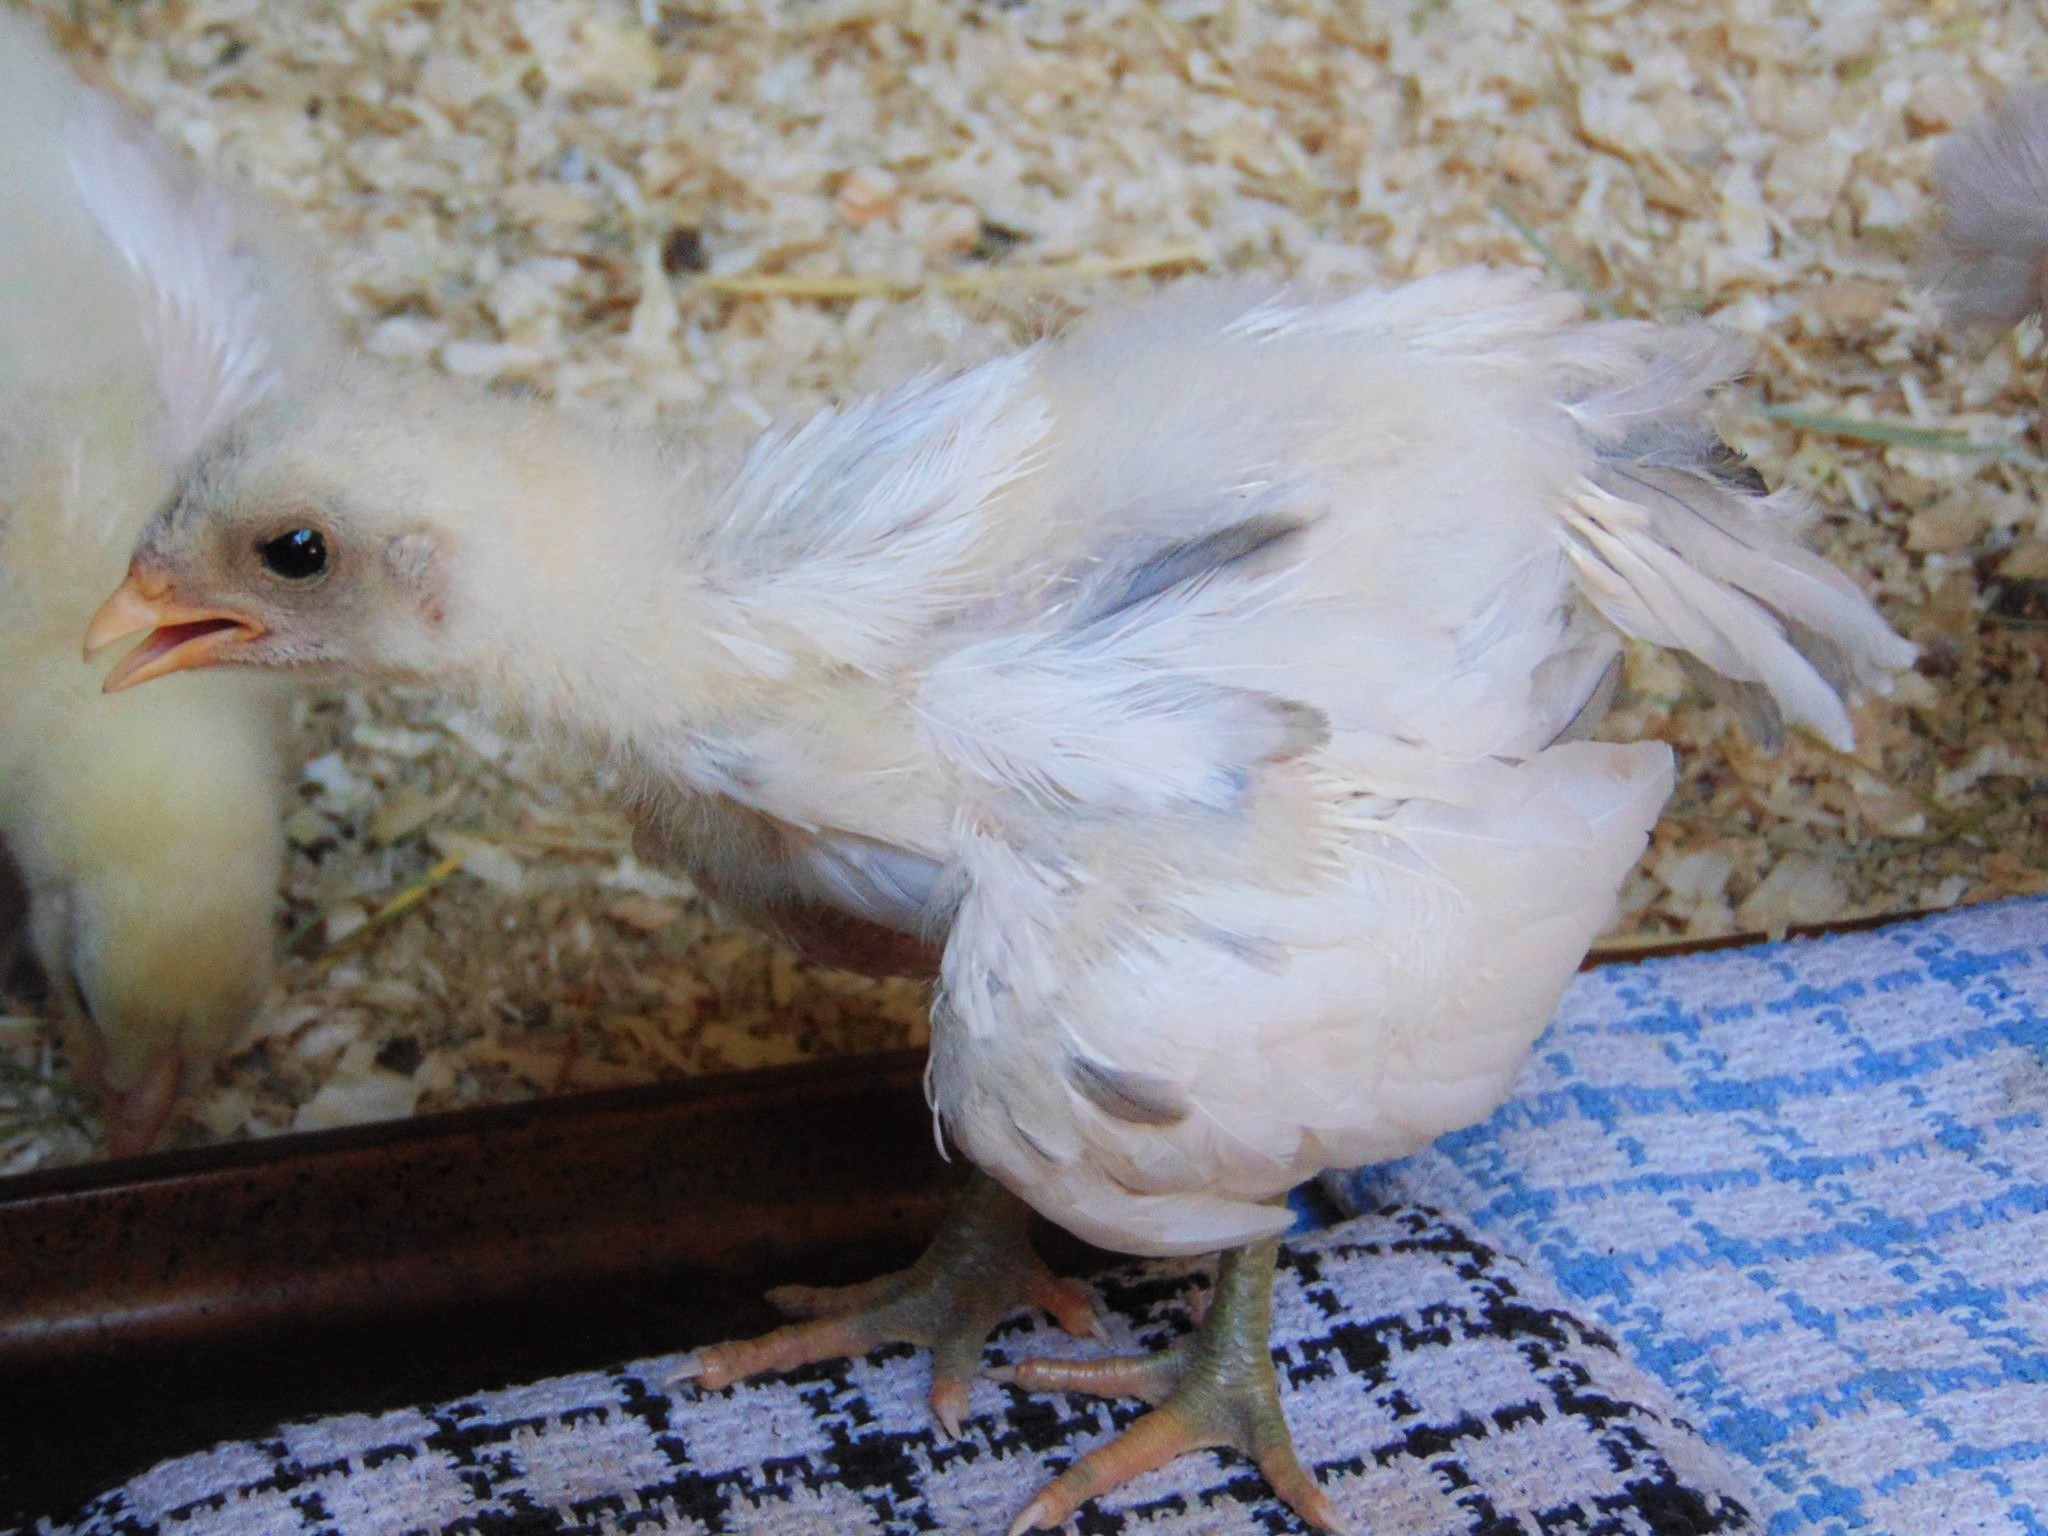 Here is Rannoch. He was over heating but found his way to the bags of ice wrapped in cloth and was standing on them to cool down. Shortly after this photo was taken he was cooled right down and off trying to fly out side the coop with the others.